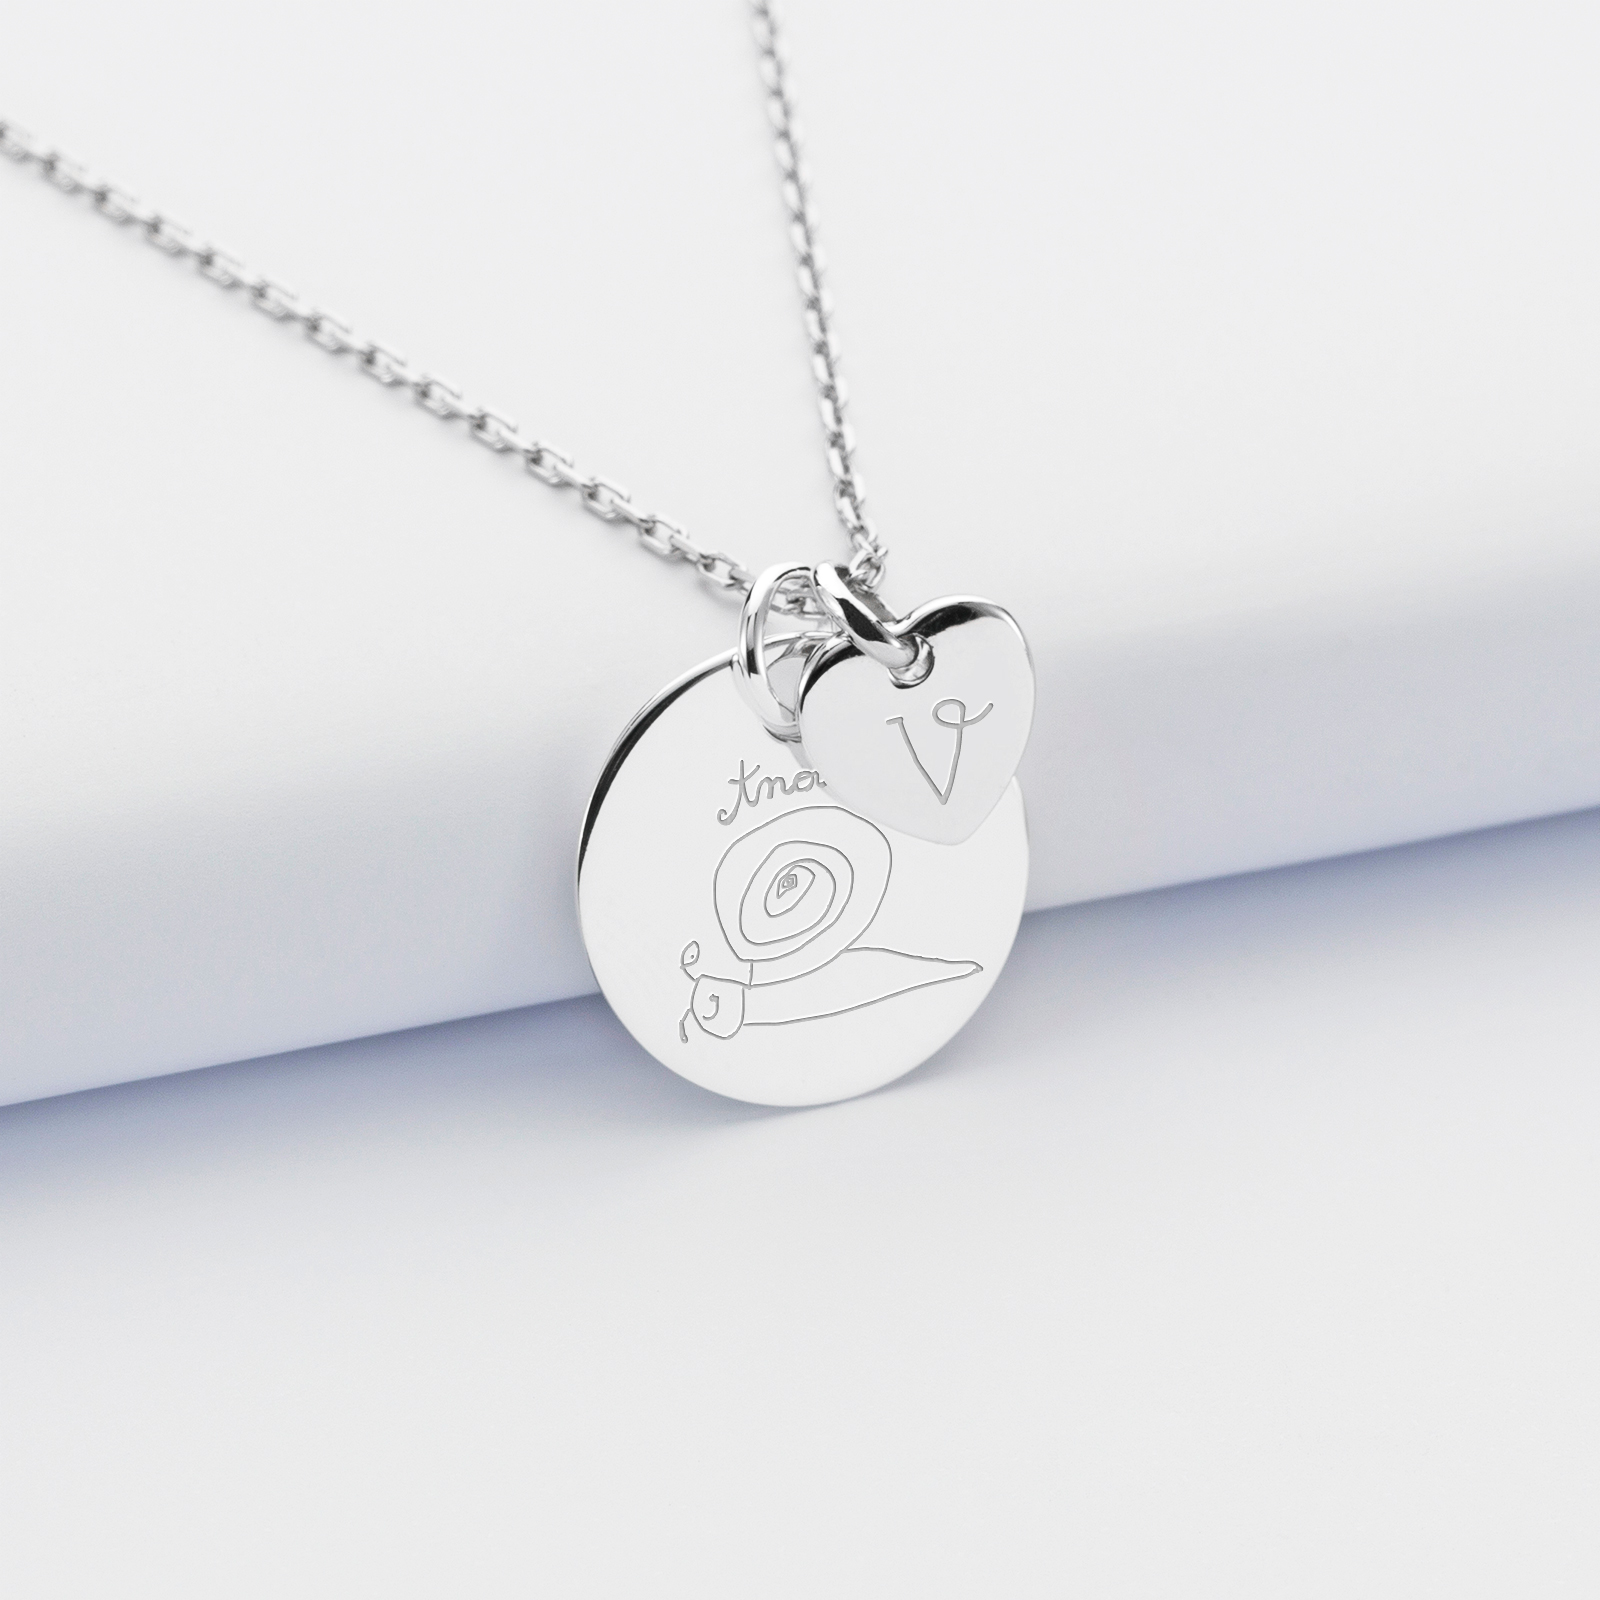 Personalised engraved silver medallion pendant 19mm and heart charm 10mm sketch